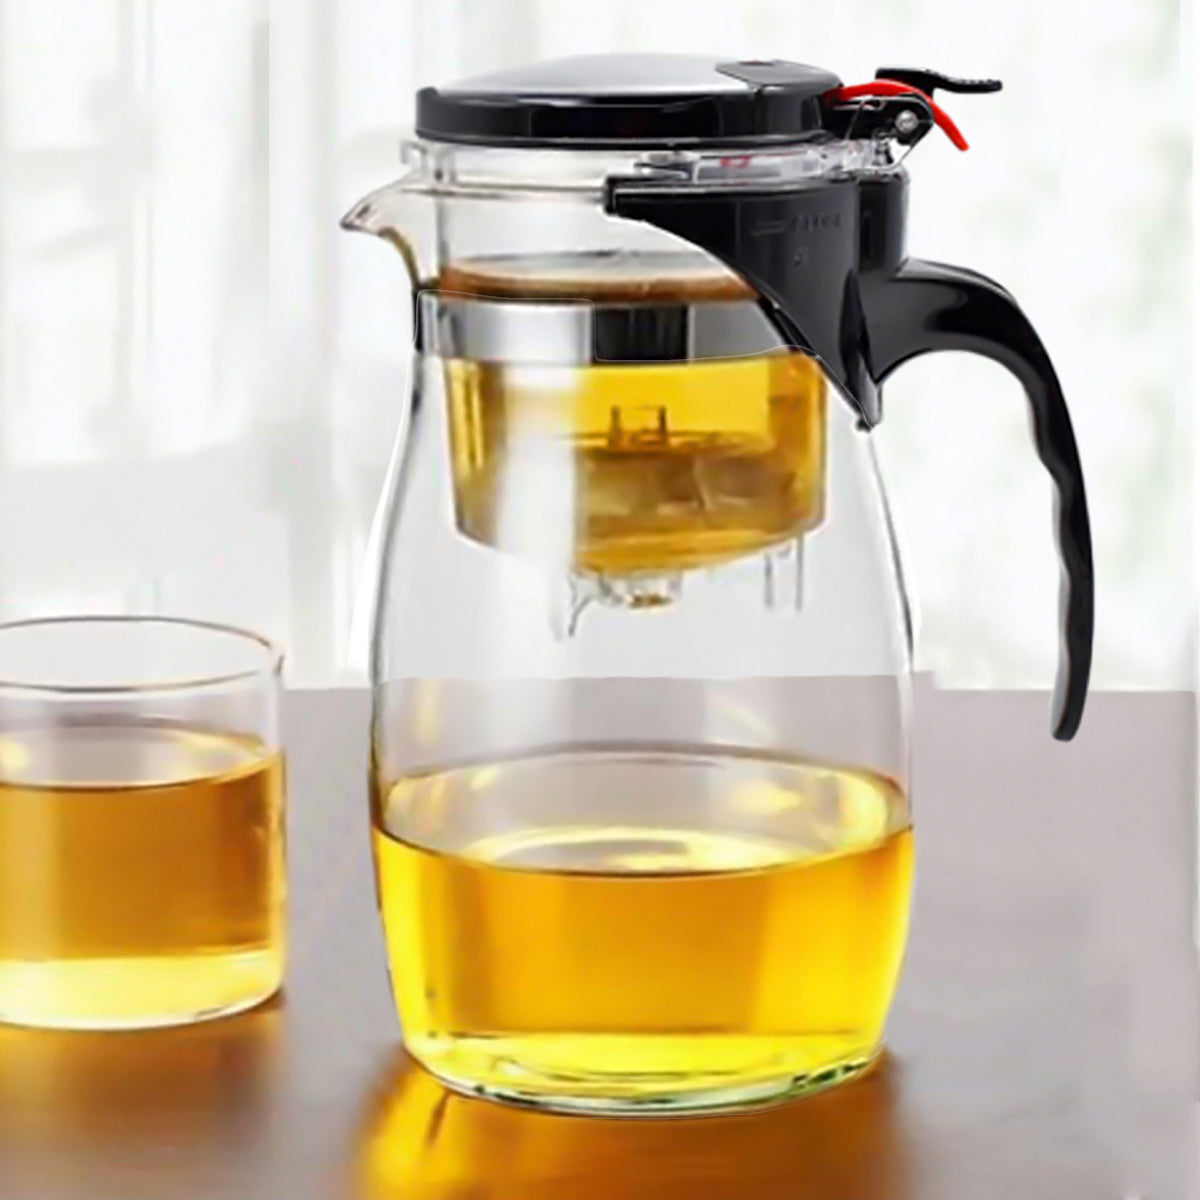 Glass Kettle with Removable Strainer/Infuser - 750ml (1267)